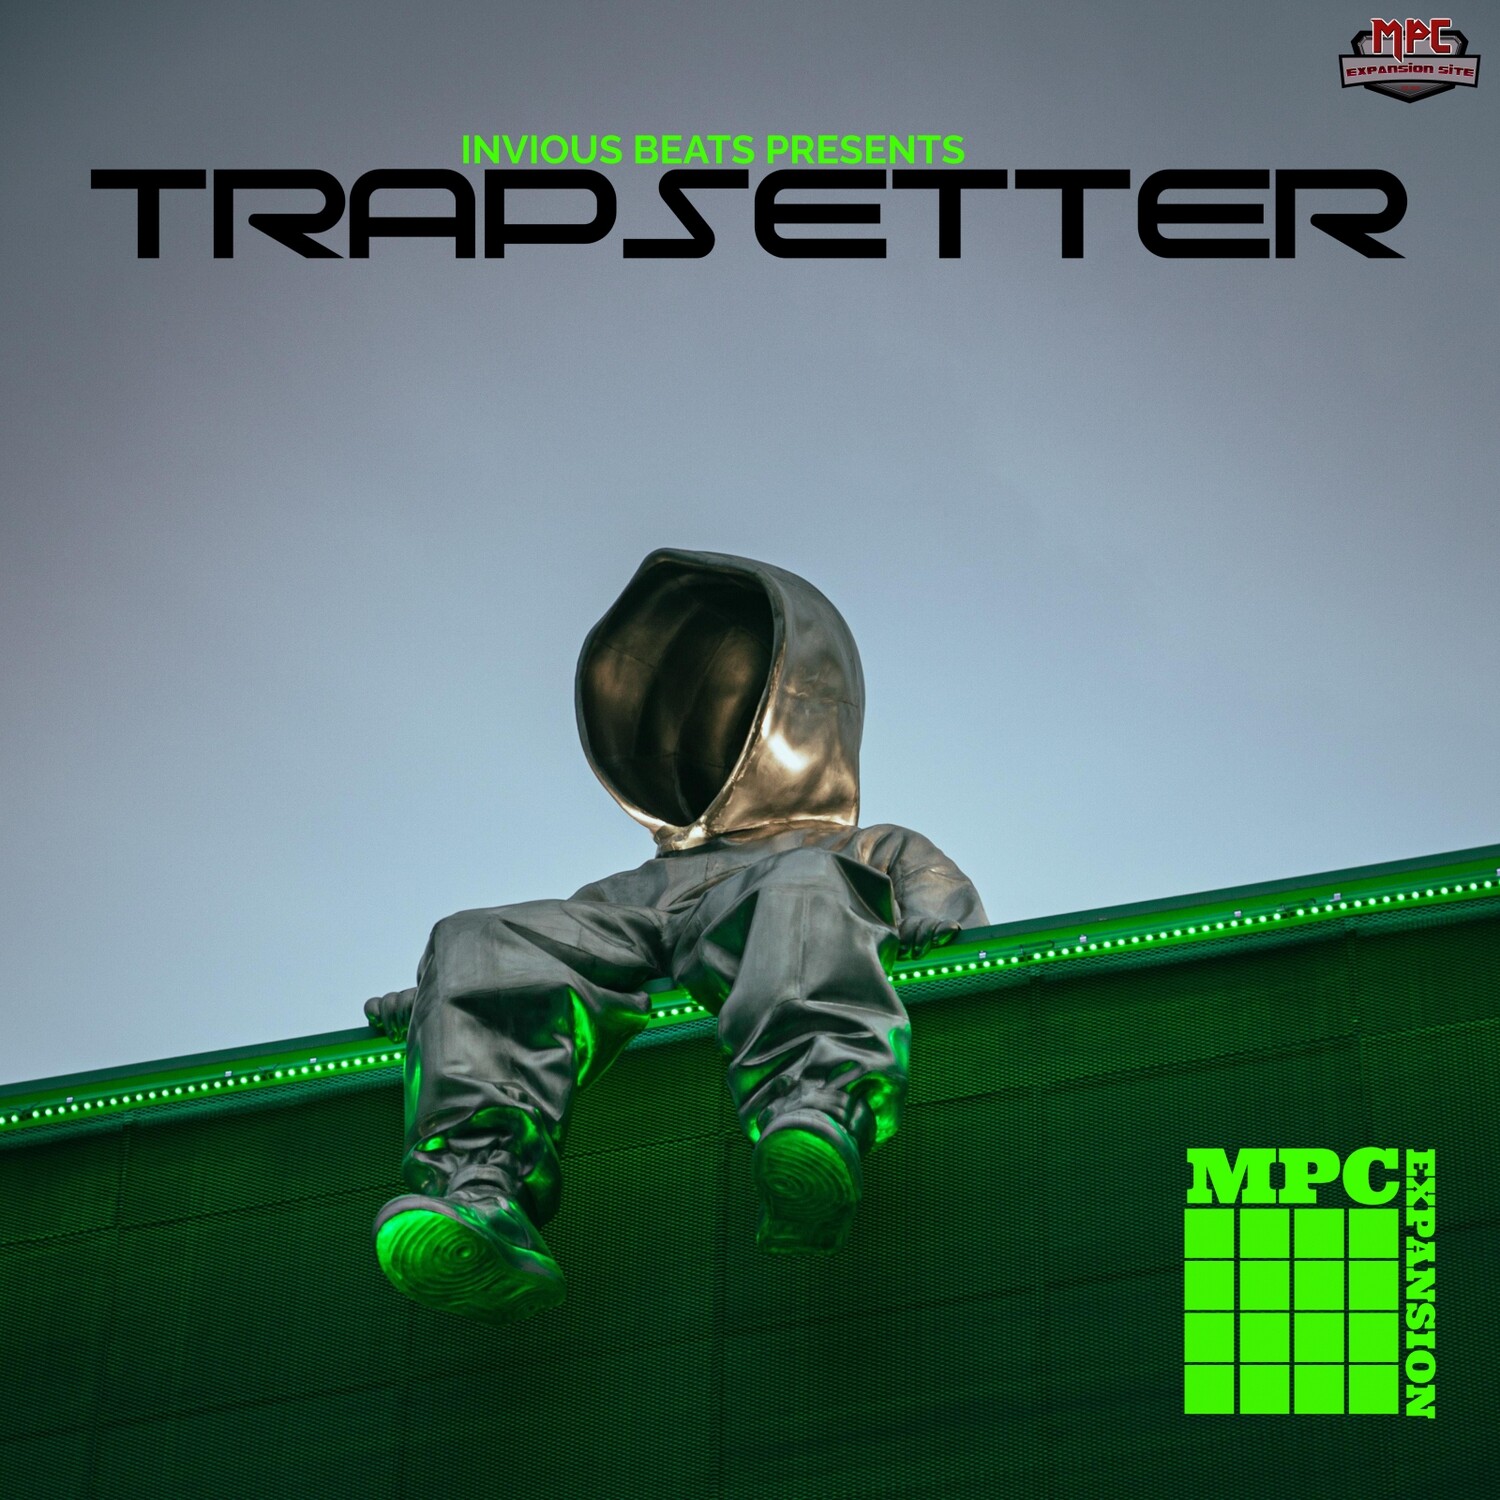 MPC EXPANSION 'TRAPSETTER' by INVIOUS